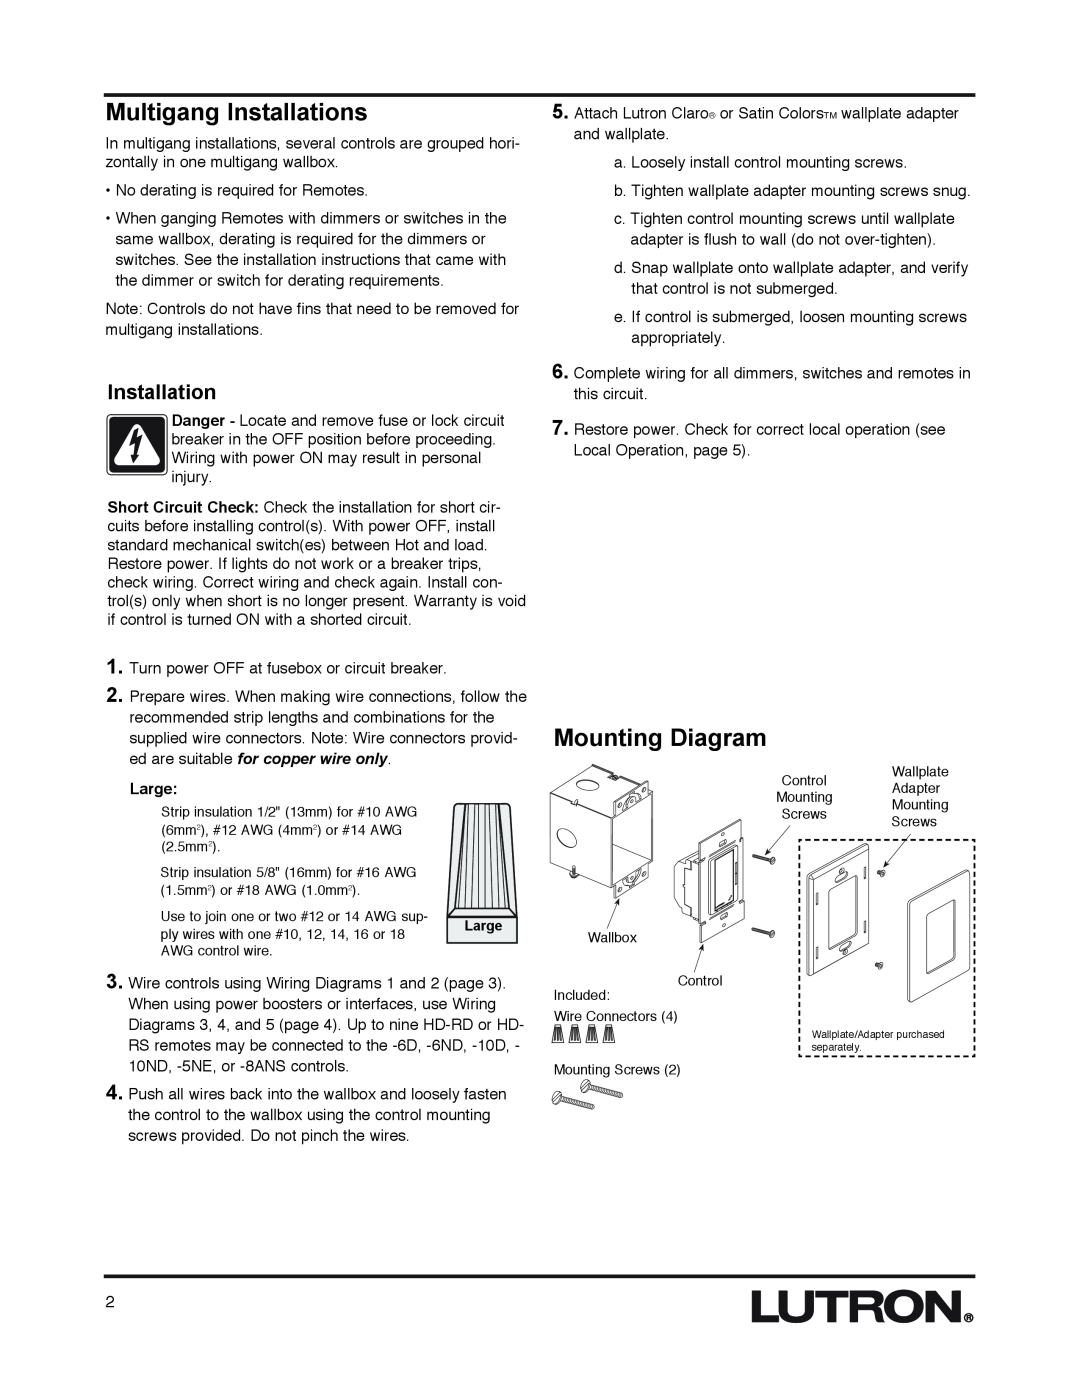 AMX HD-RS, HD-RD installation instructions Multigang Installations, Mounting Diagram, Large 